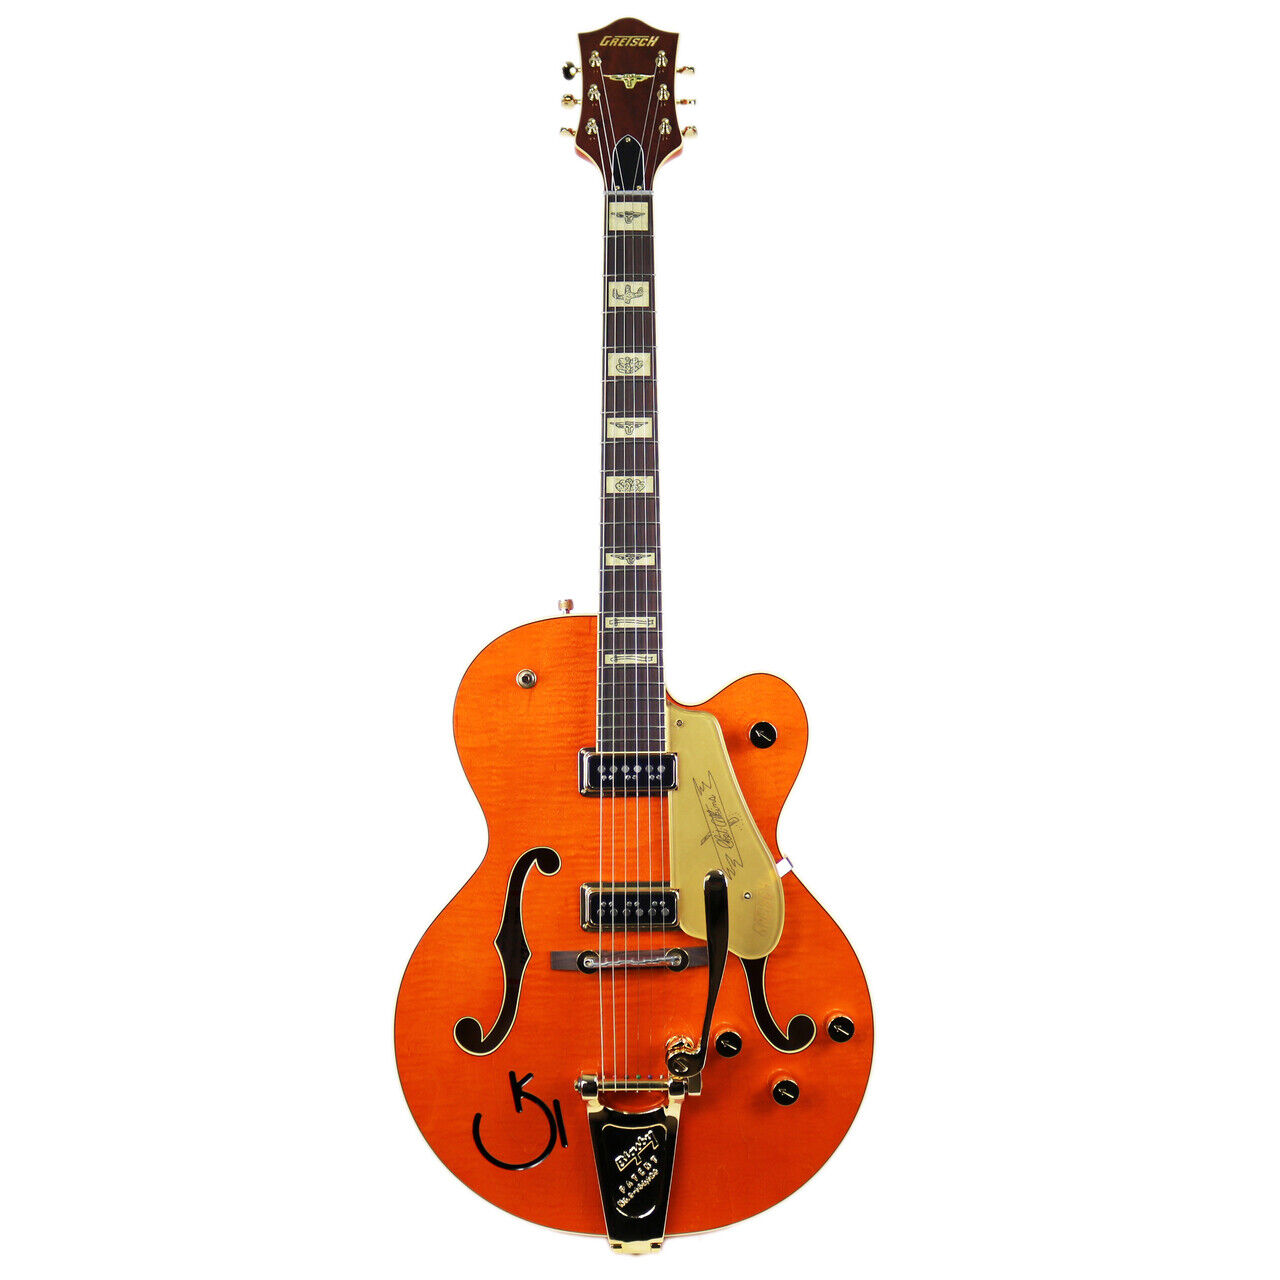 Gretsch G6120T-55 Vintage Select '55 Chet Atkins Hollow Body